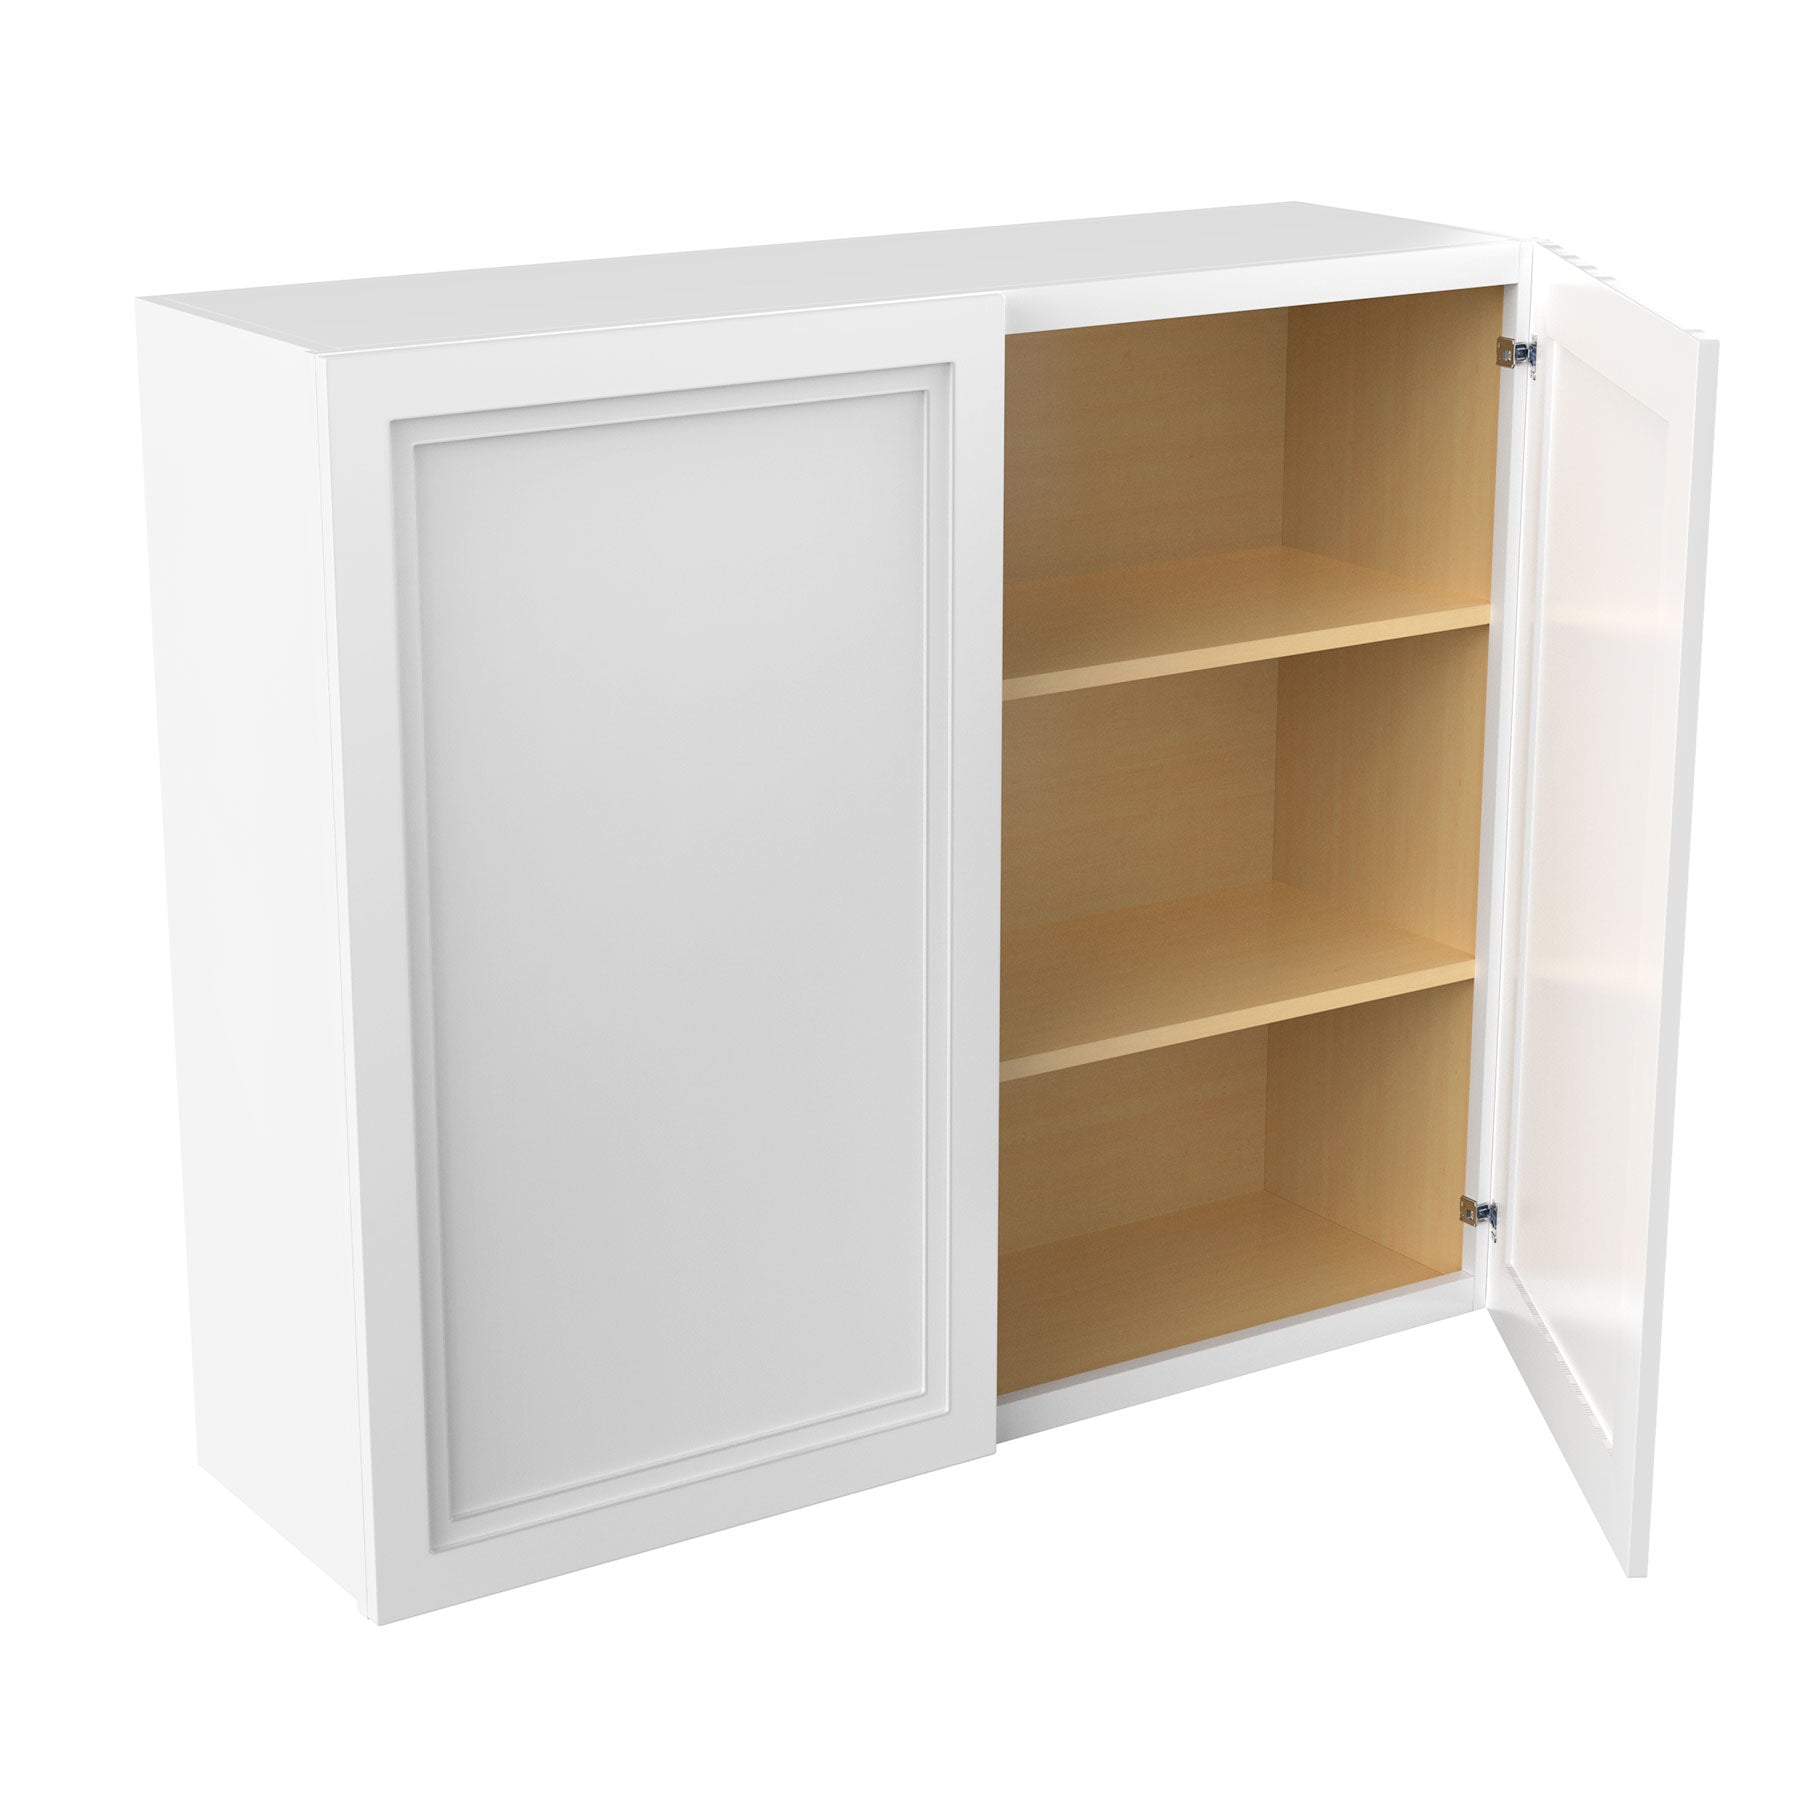 Fashion White - Double Door Wall Cabinet | 42"W x 36"H x 12"D